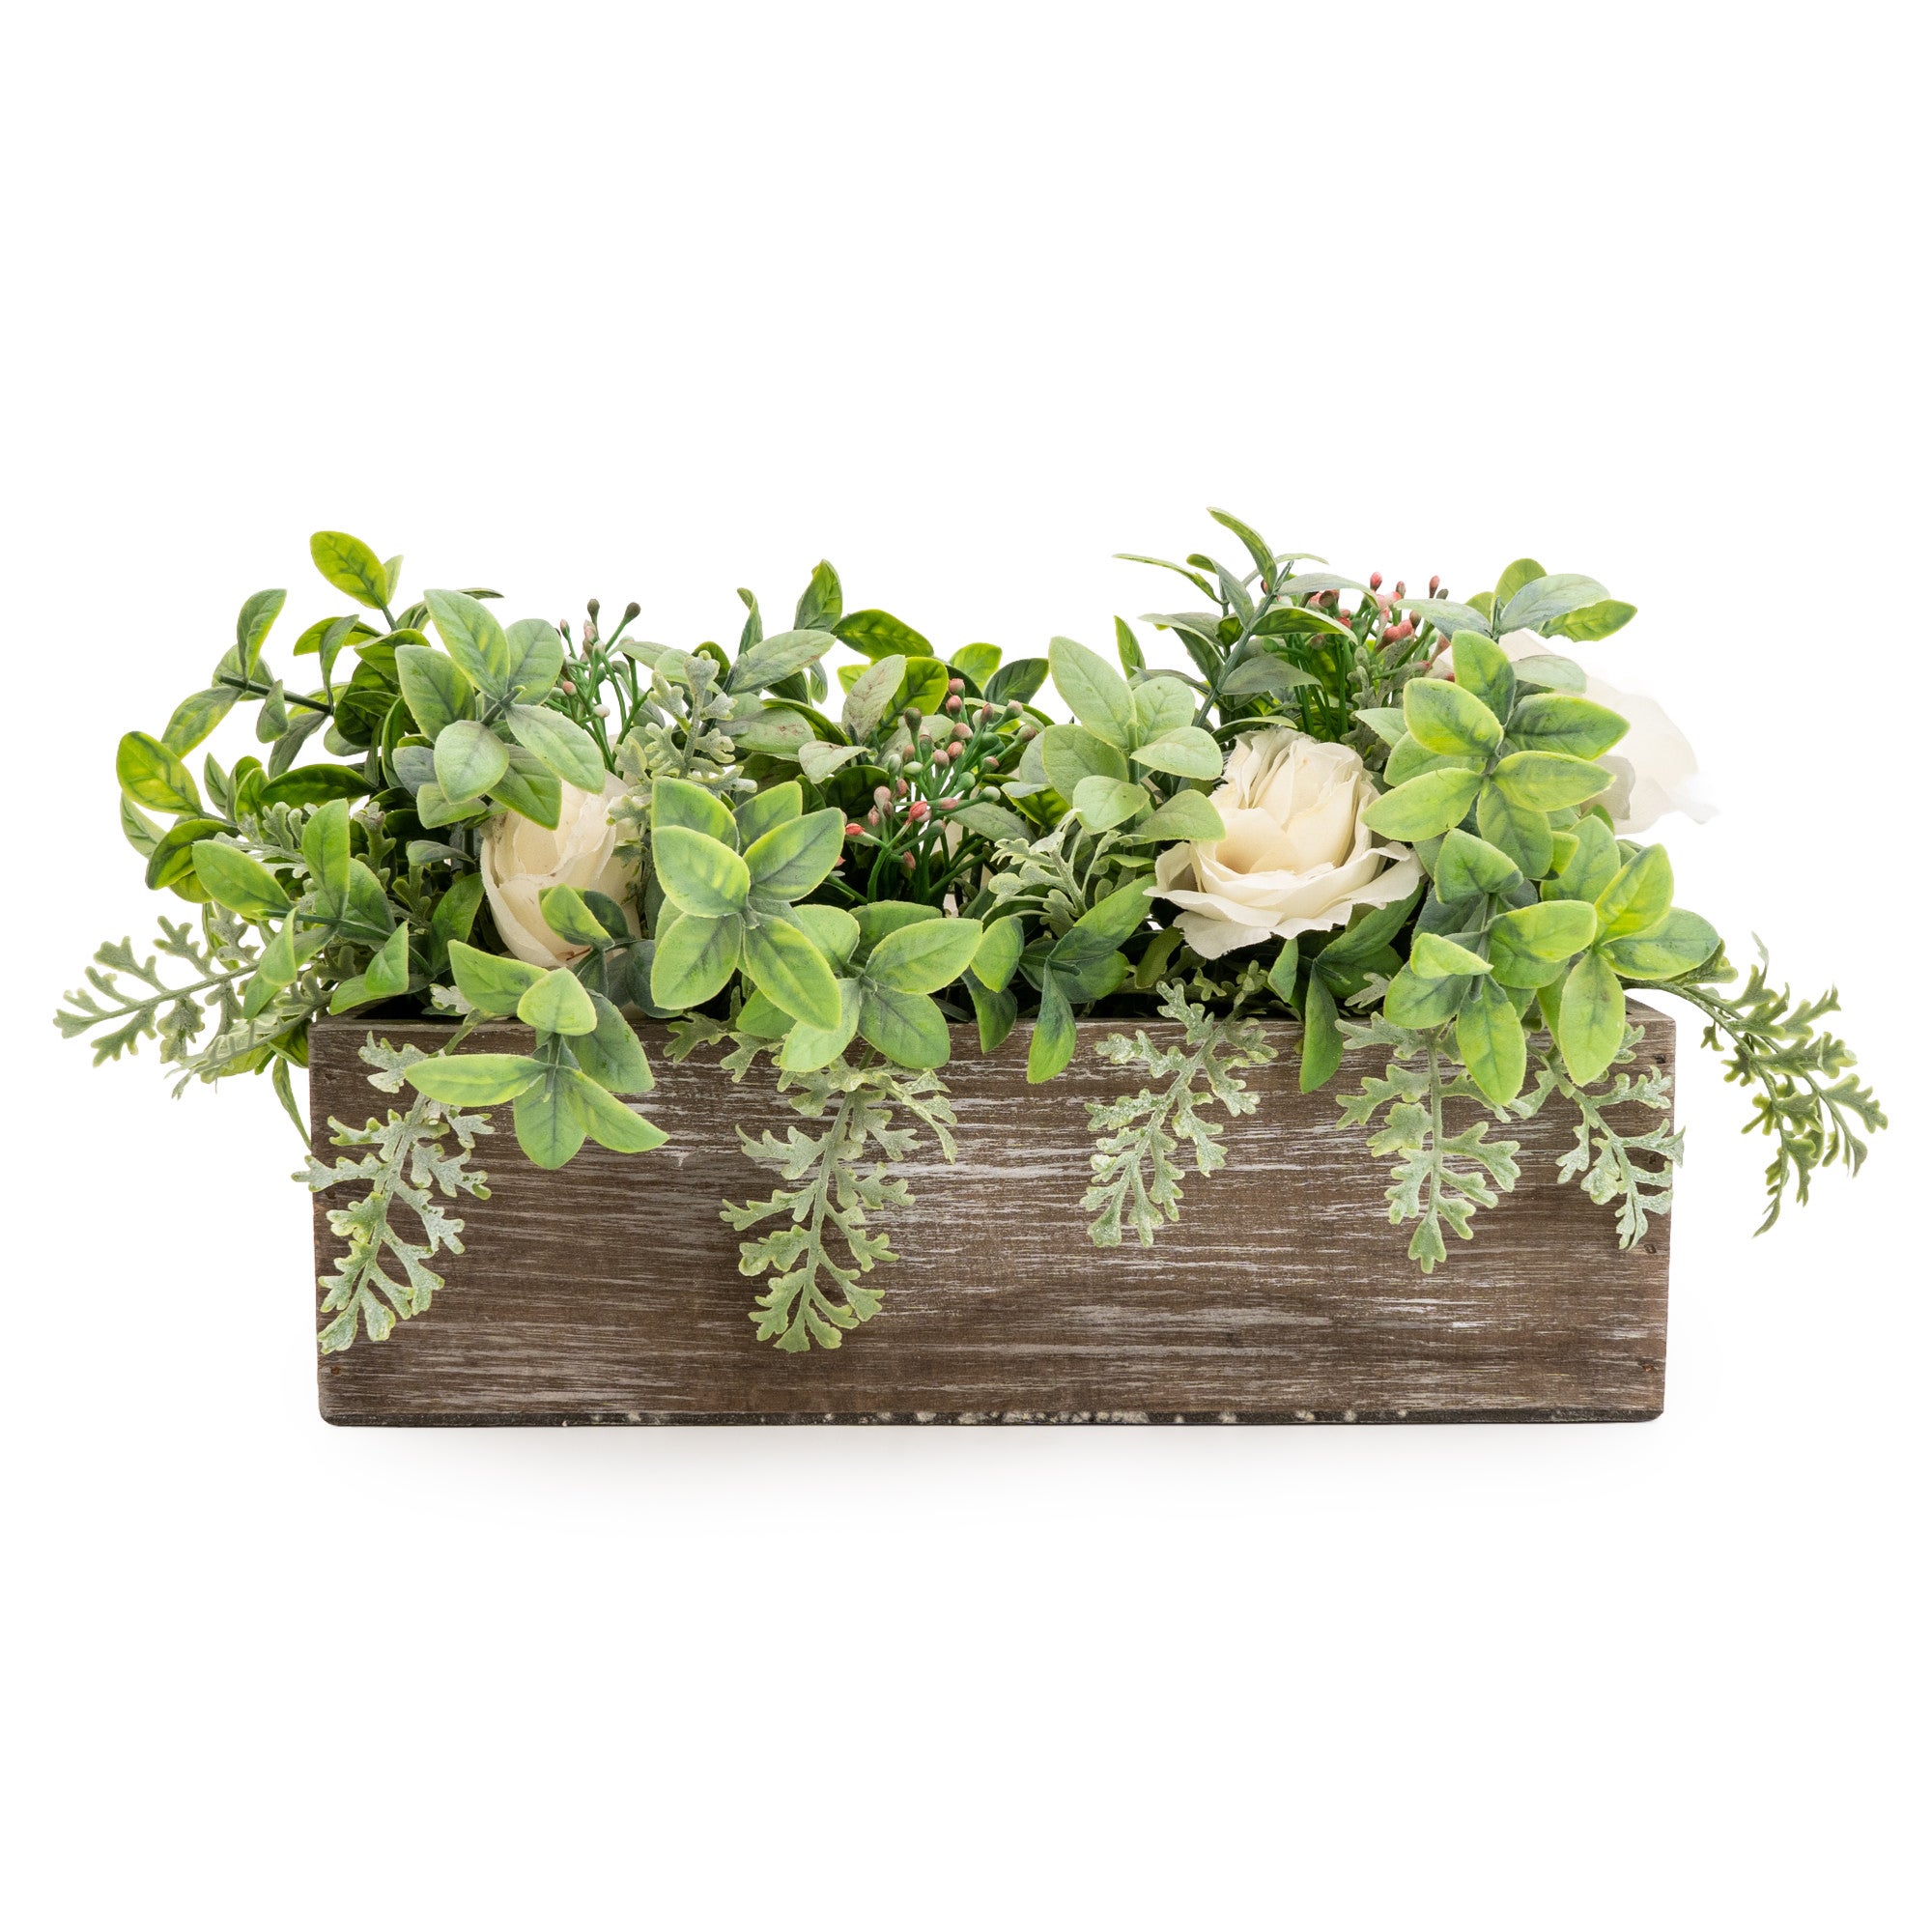 Artificial Flowers and Plants | Dunelm | Page 2